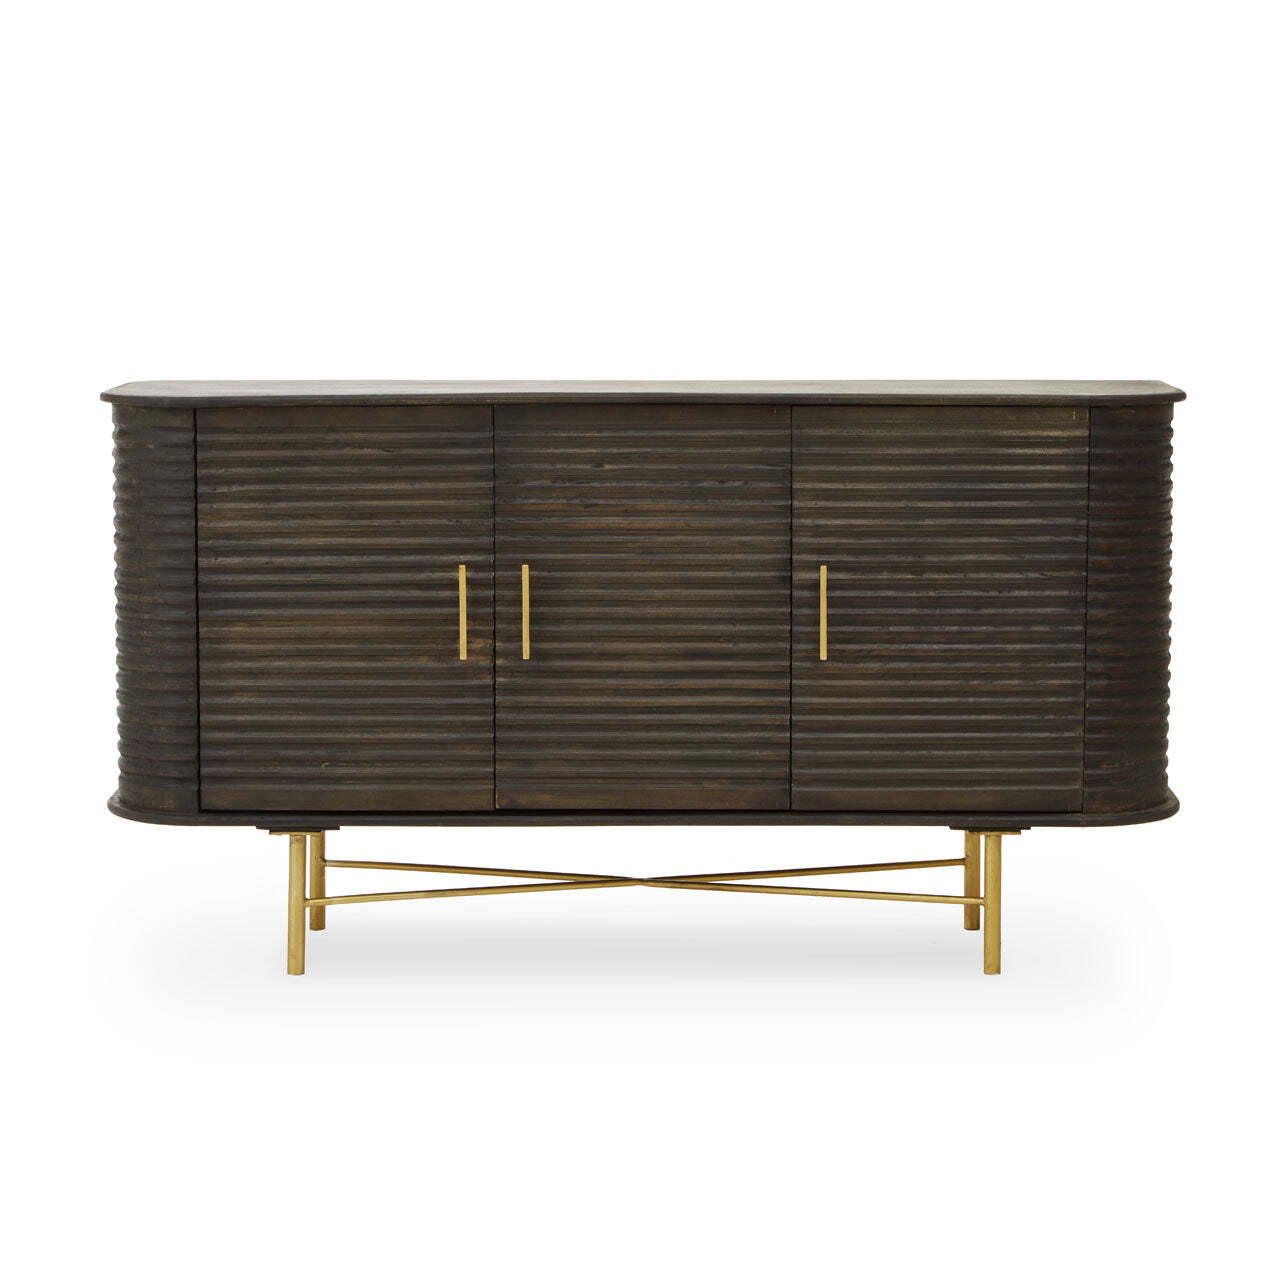 Olivia's Sawyer 3 Drawer Side Table in Brown & Brass - image 1